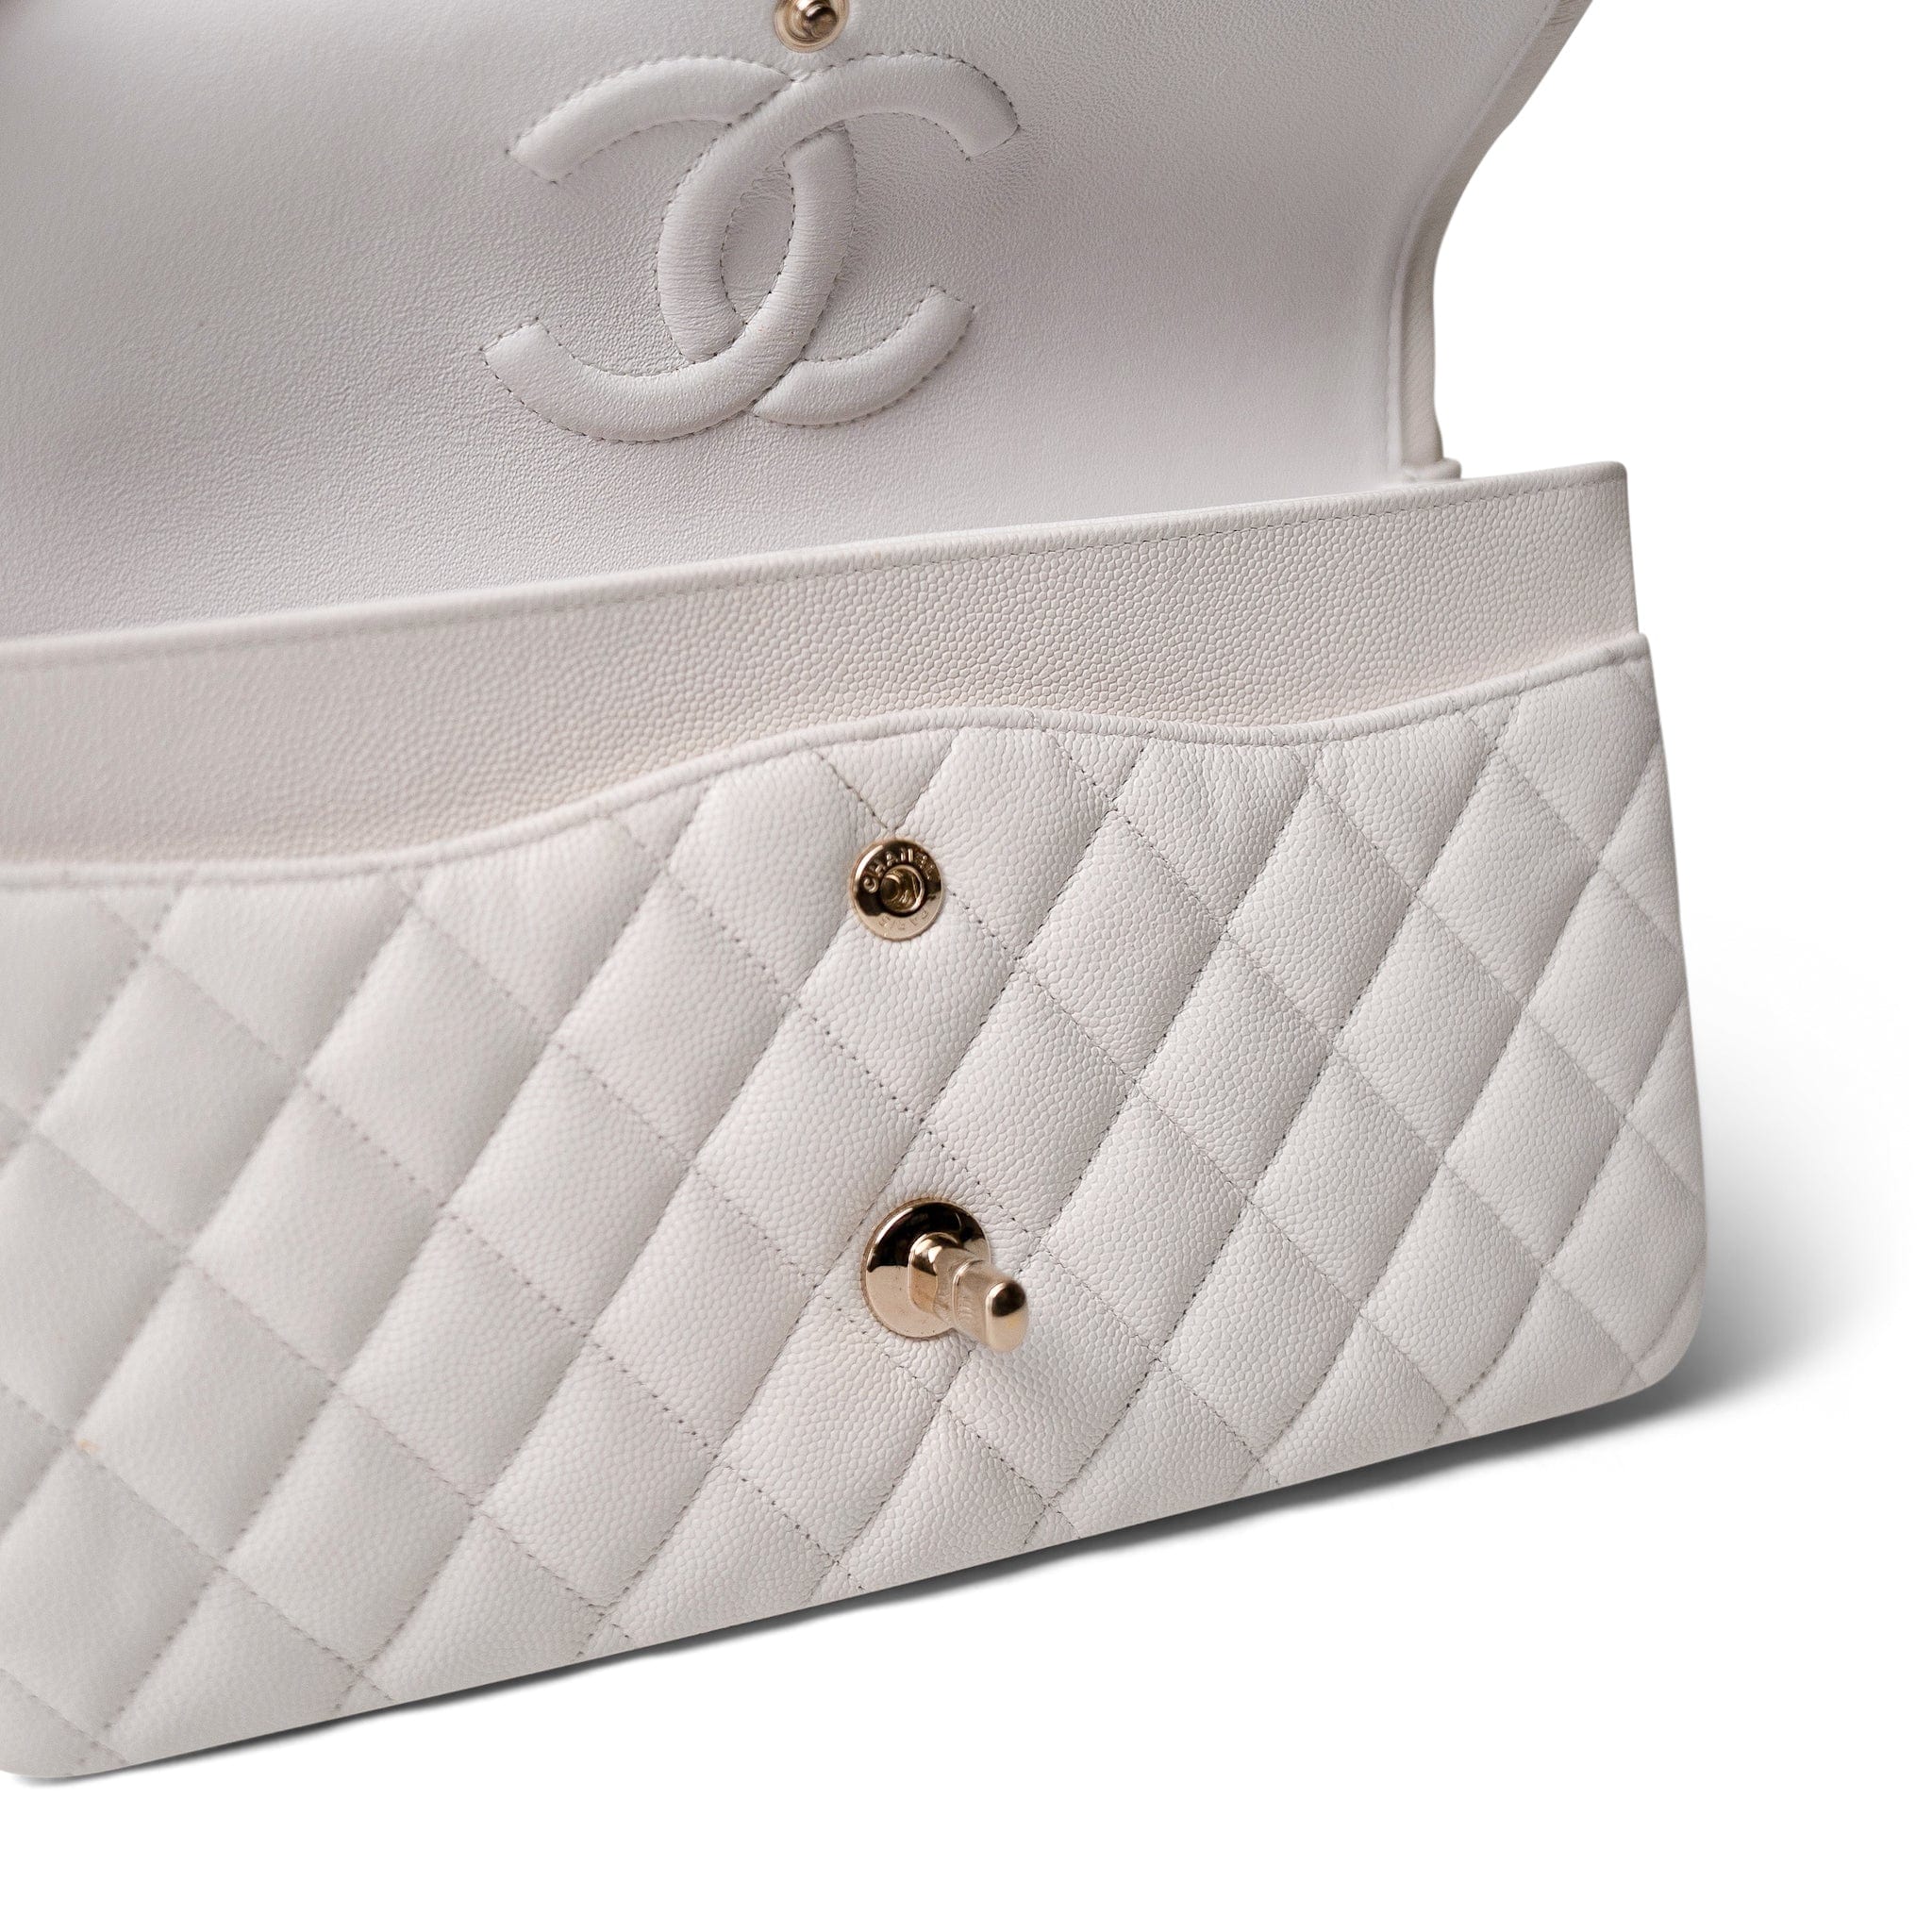 CHANEL White White Caviar Quilted Medium Classic Flap Light Gold Hardware - Redeluxe